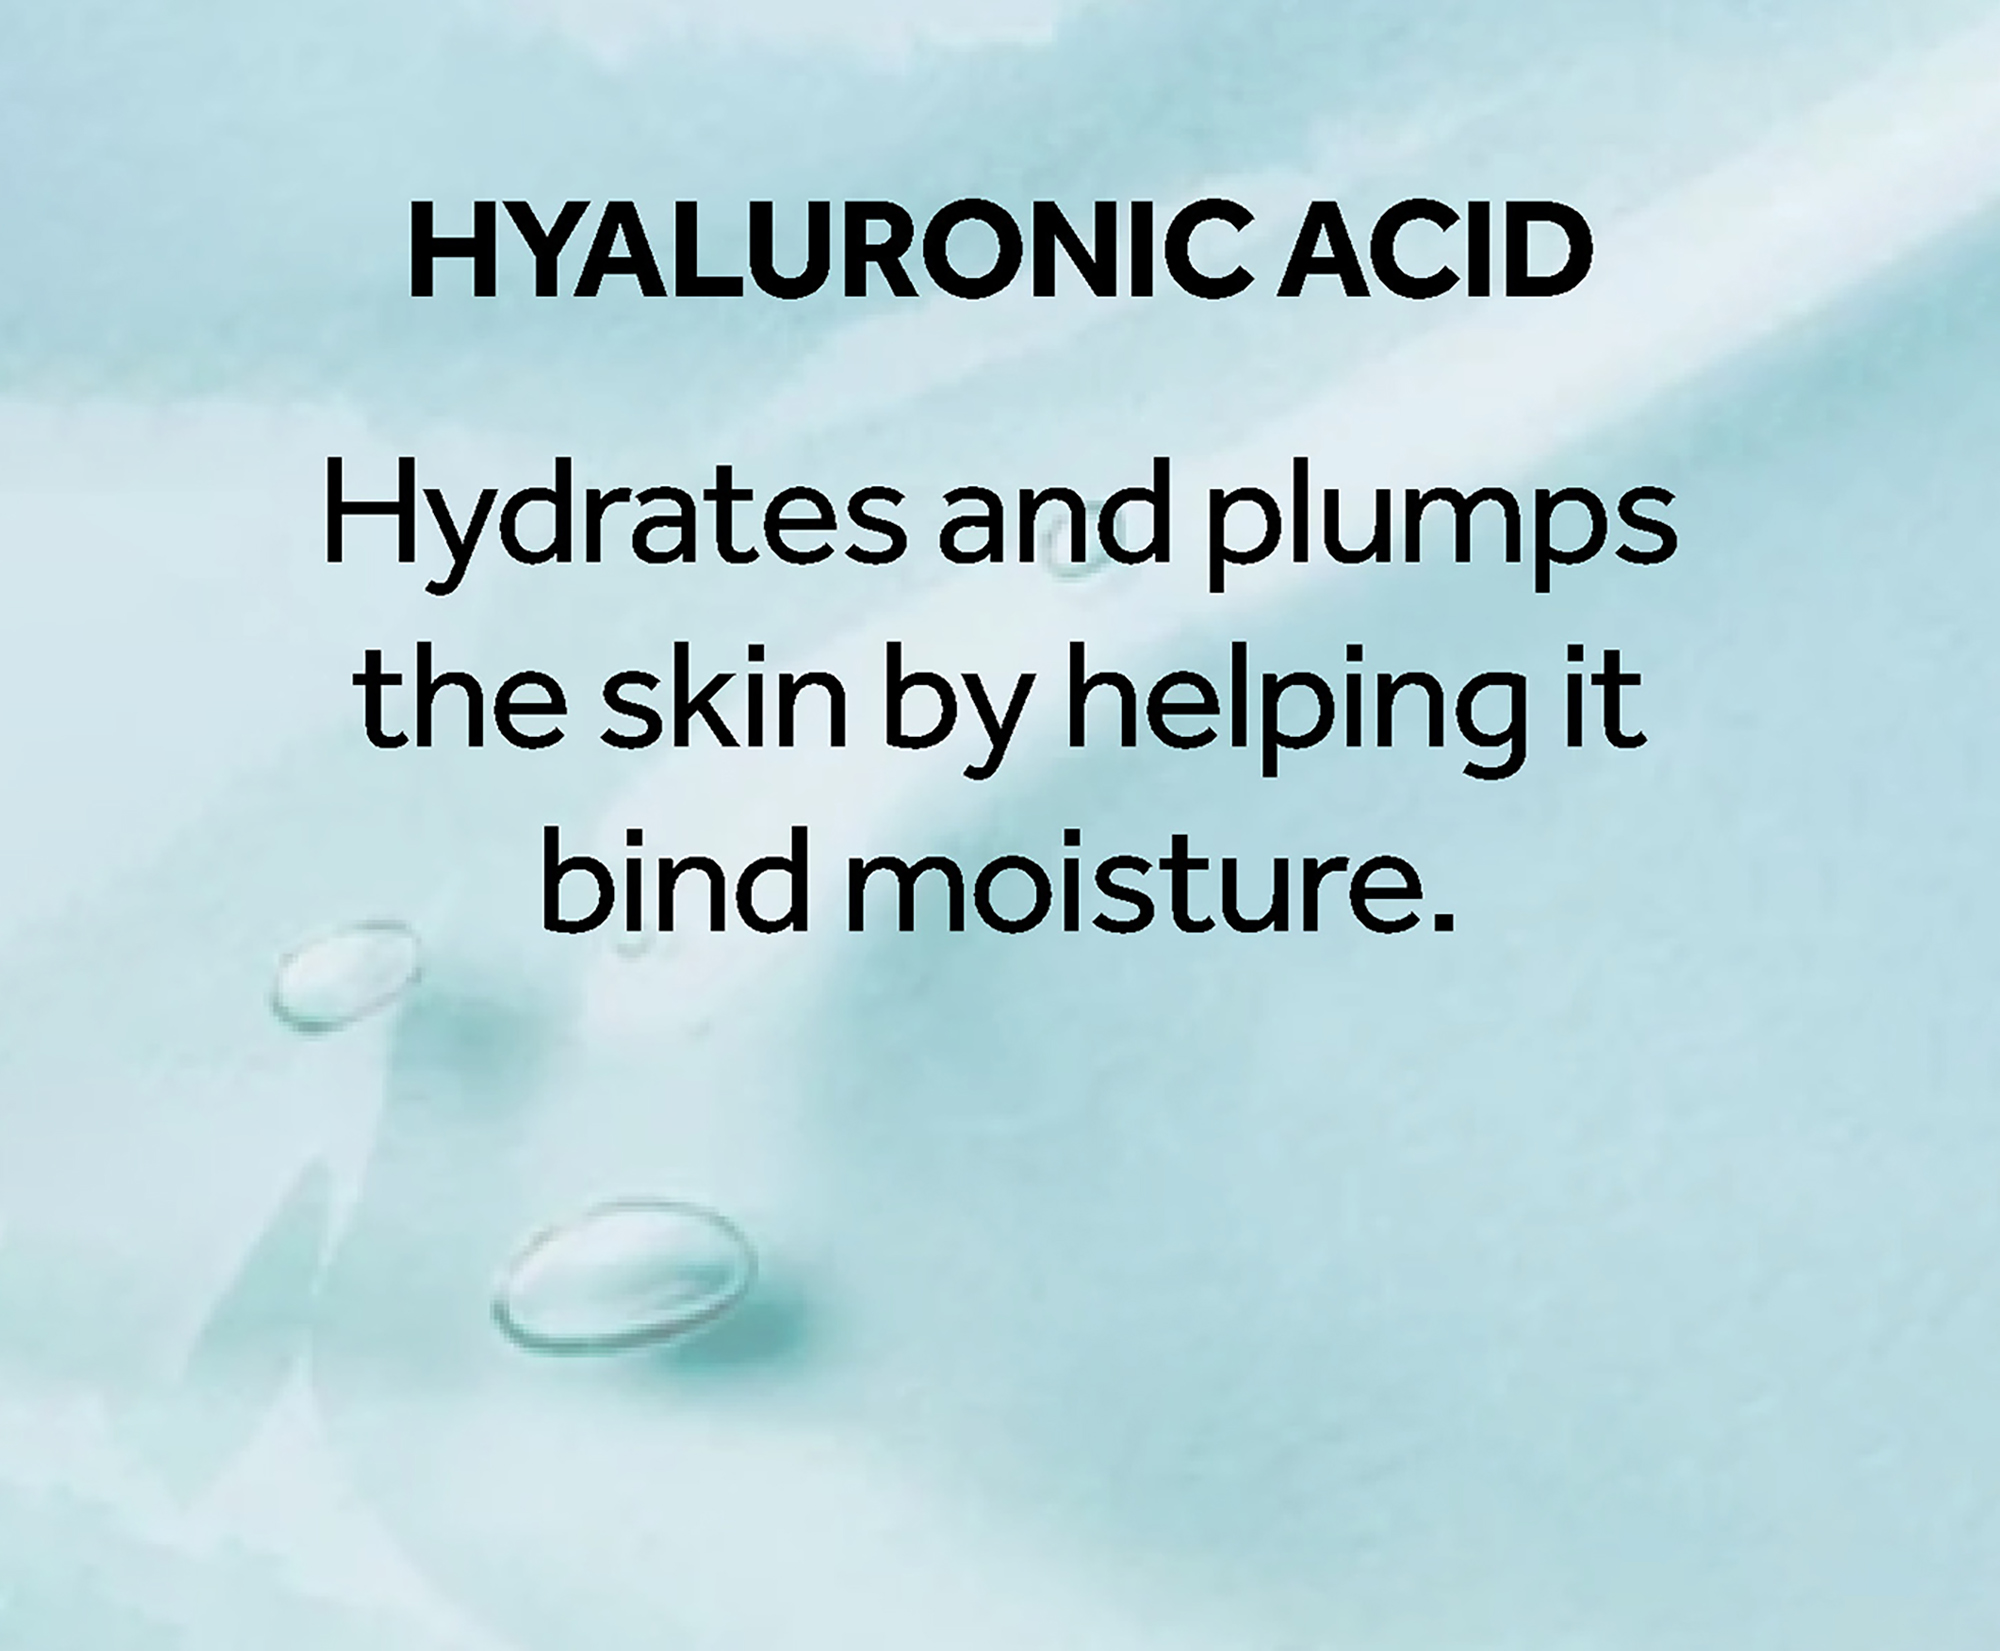 Hyaluronic acid Hydrates and plumps the skin by helping it bind moisture.